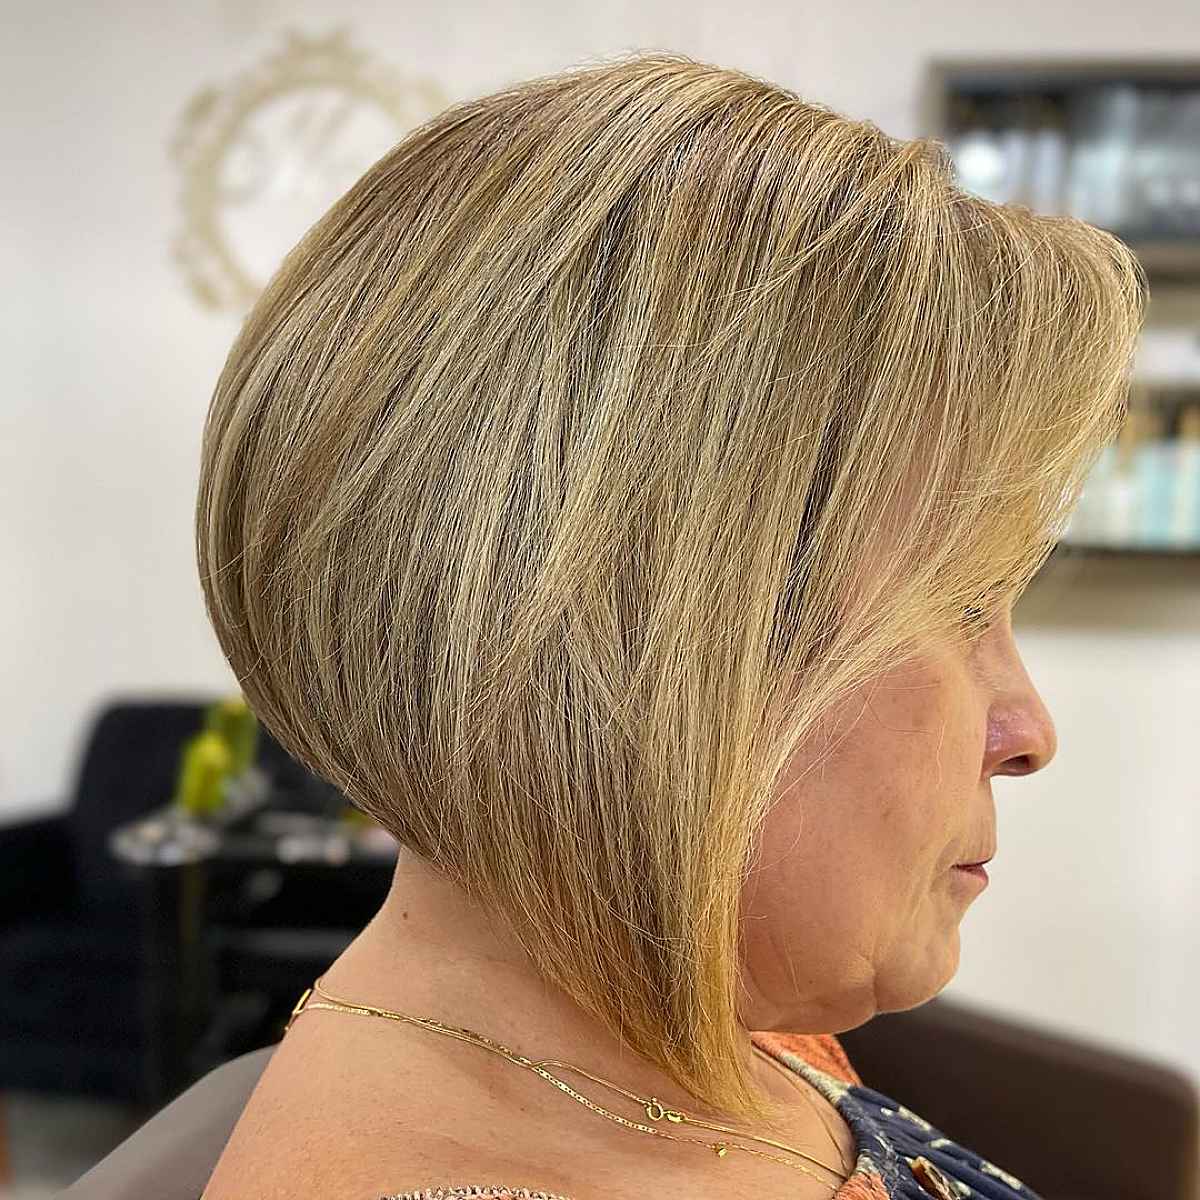 26 Fabulous Short Hairstyles for Women Over 50 - Pretty Designs